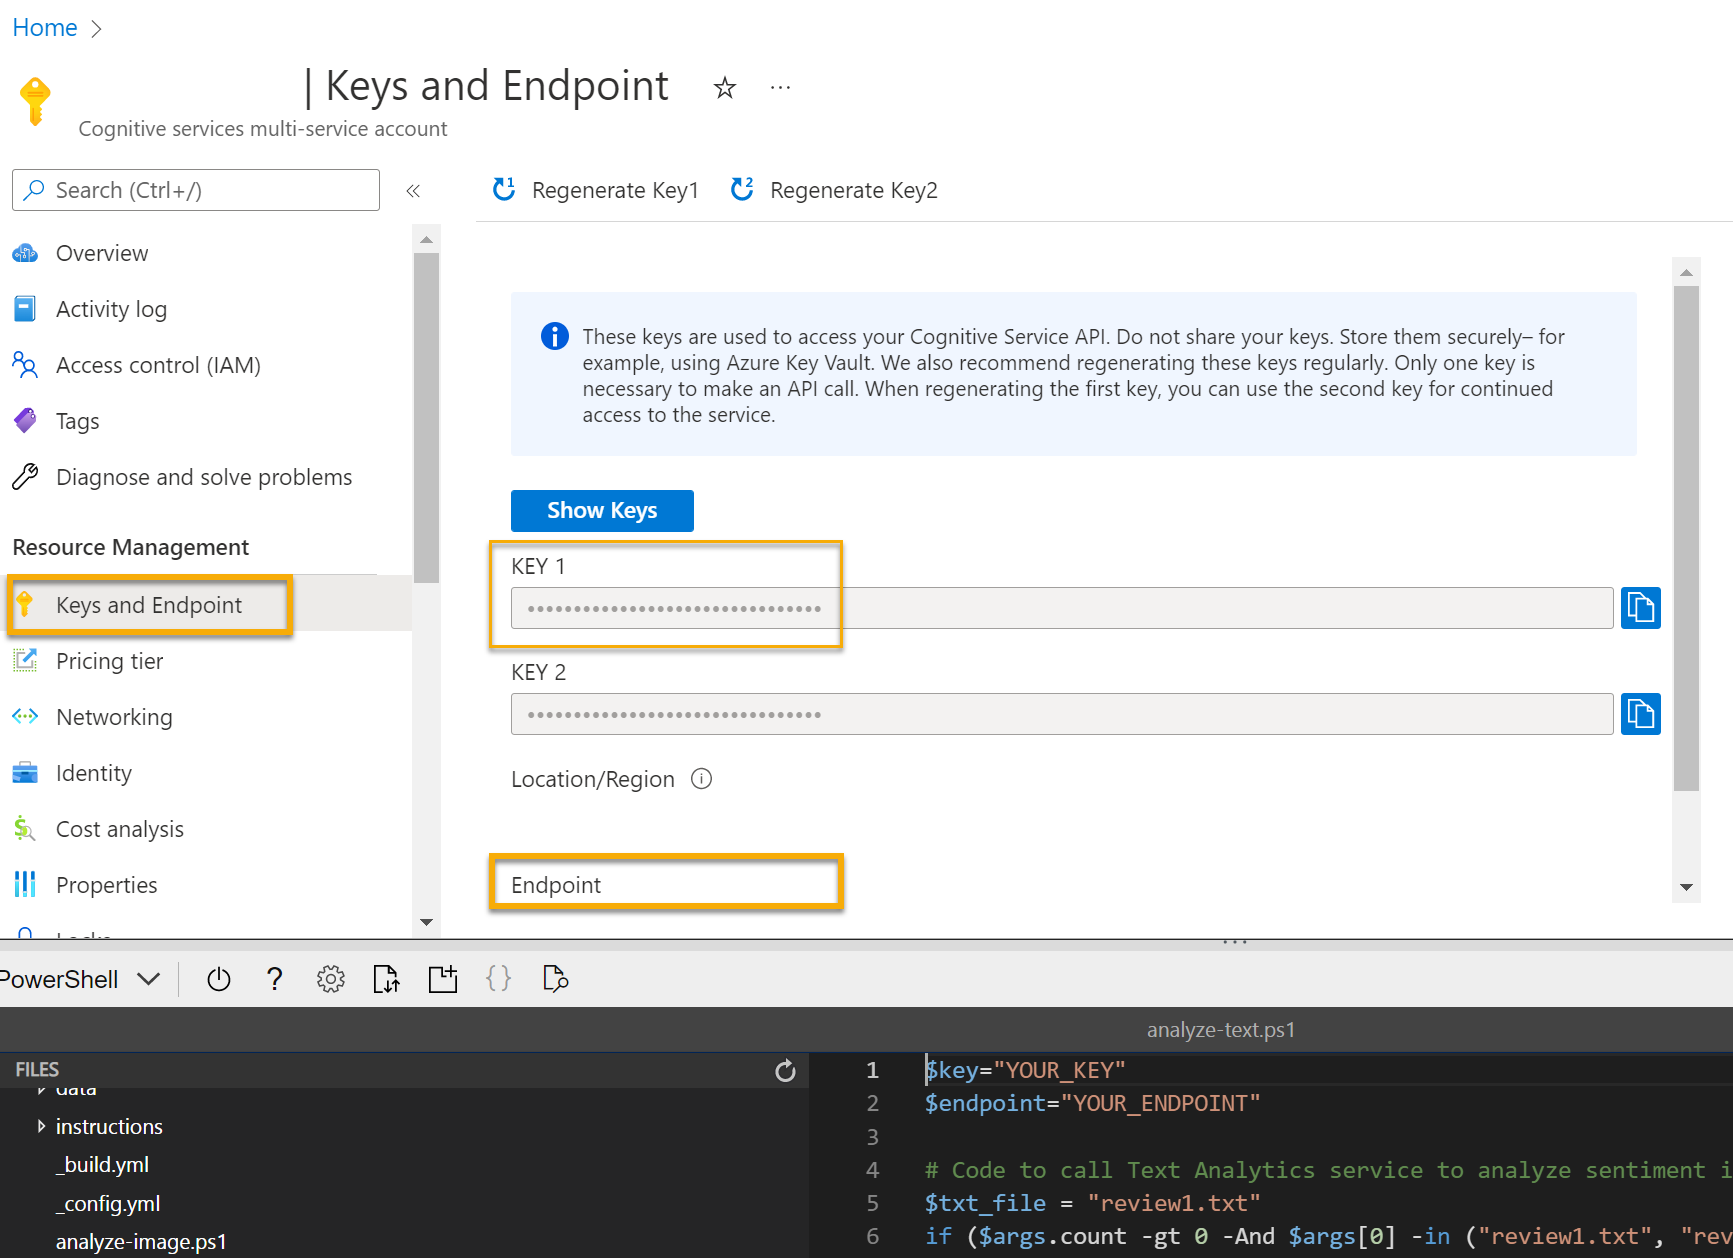 Find the key and endpoint tab in your Cognitive Services resource's left hand pane.